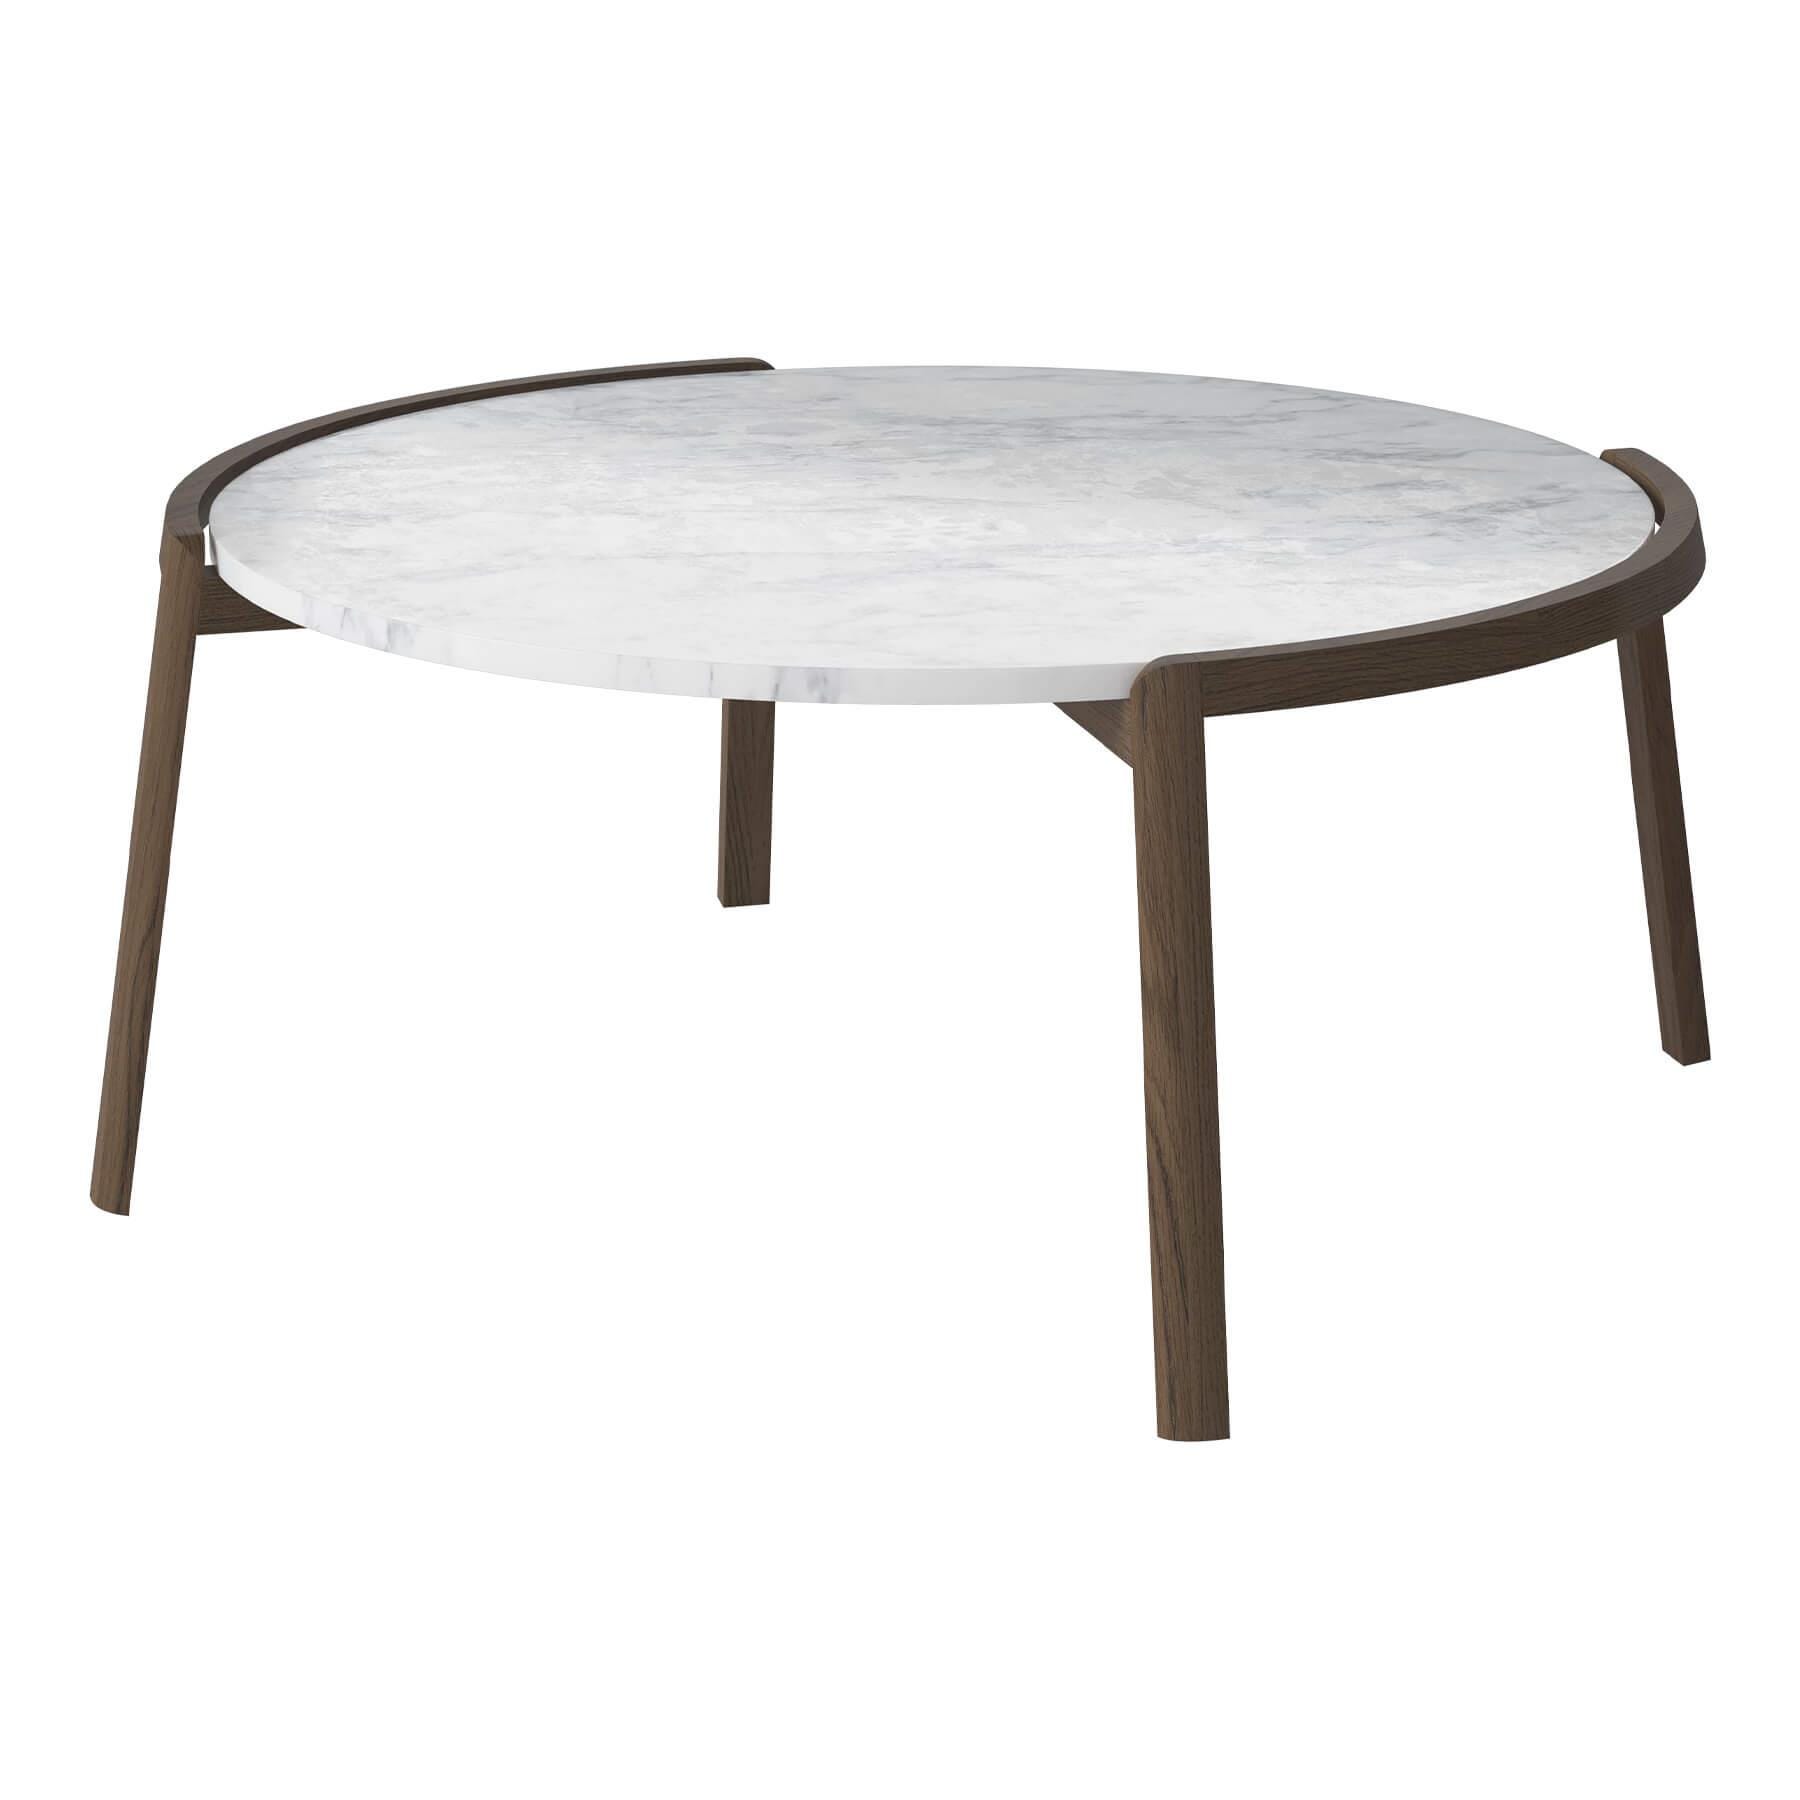 Bolia Mix Coffee Table Large Dark Oiled Legs Grey White Marble Designer Furniture From Holloways Of Ludlow